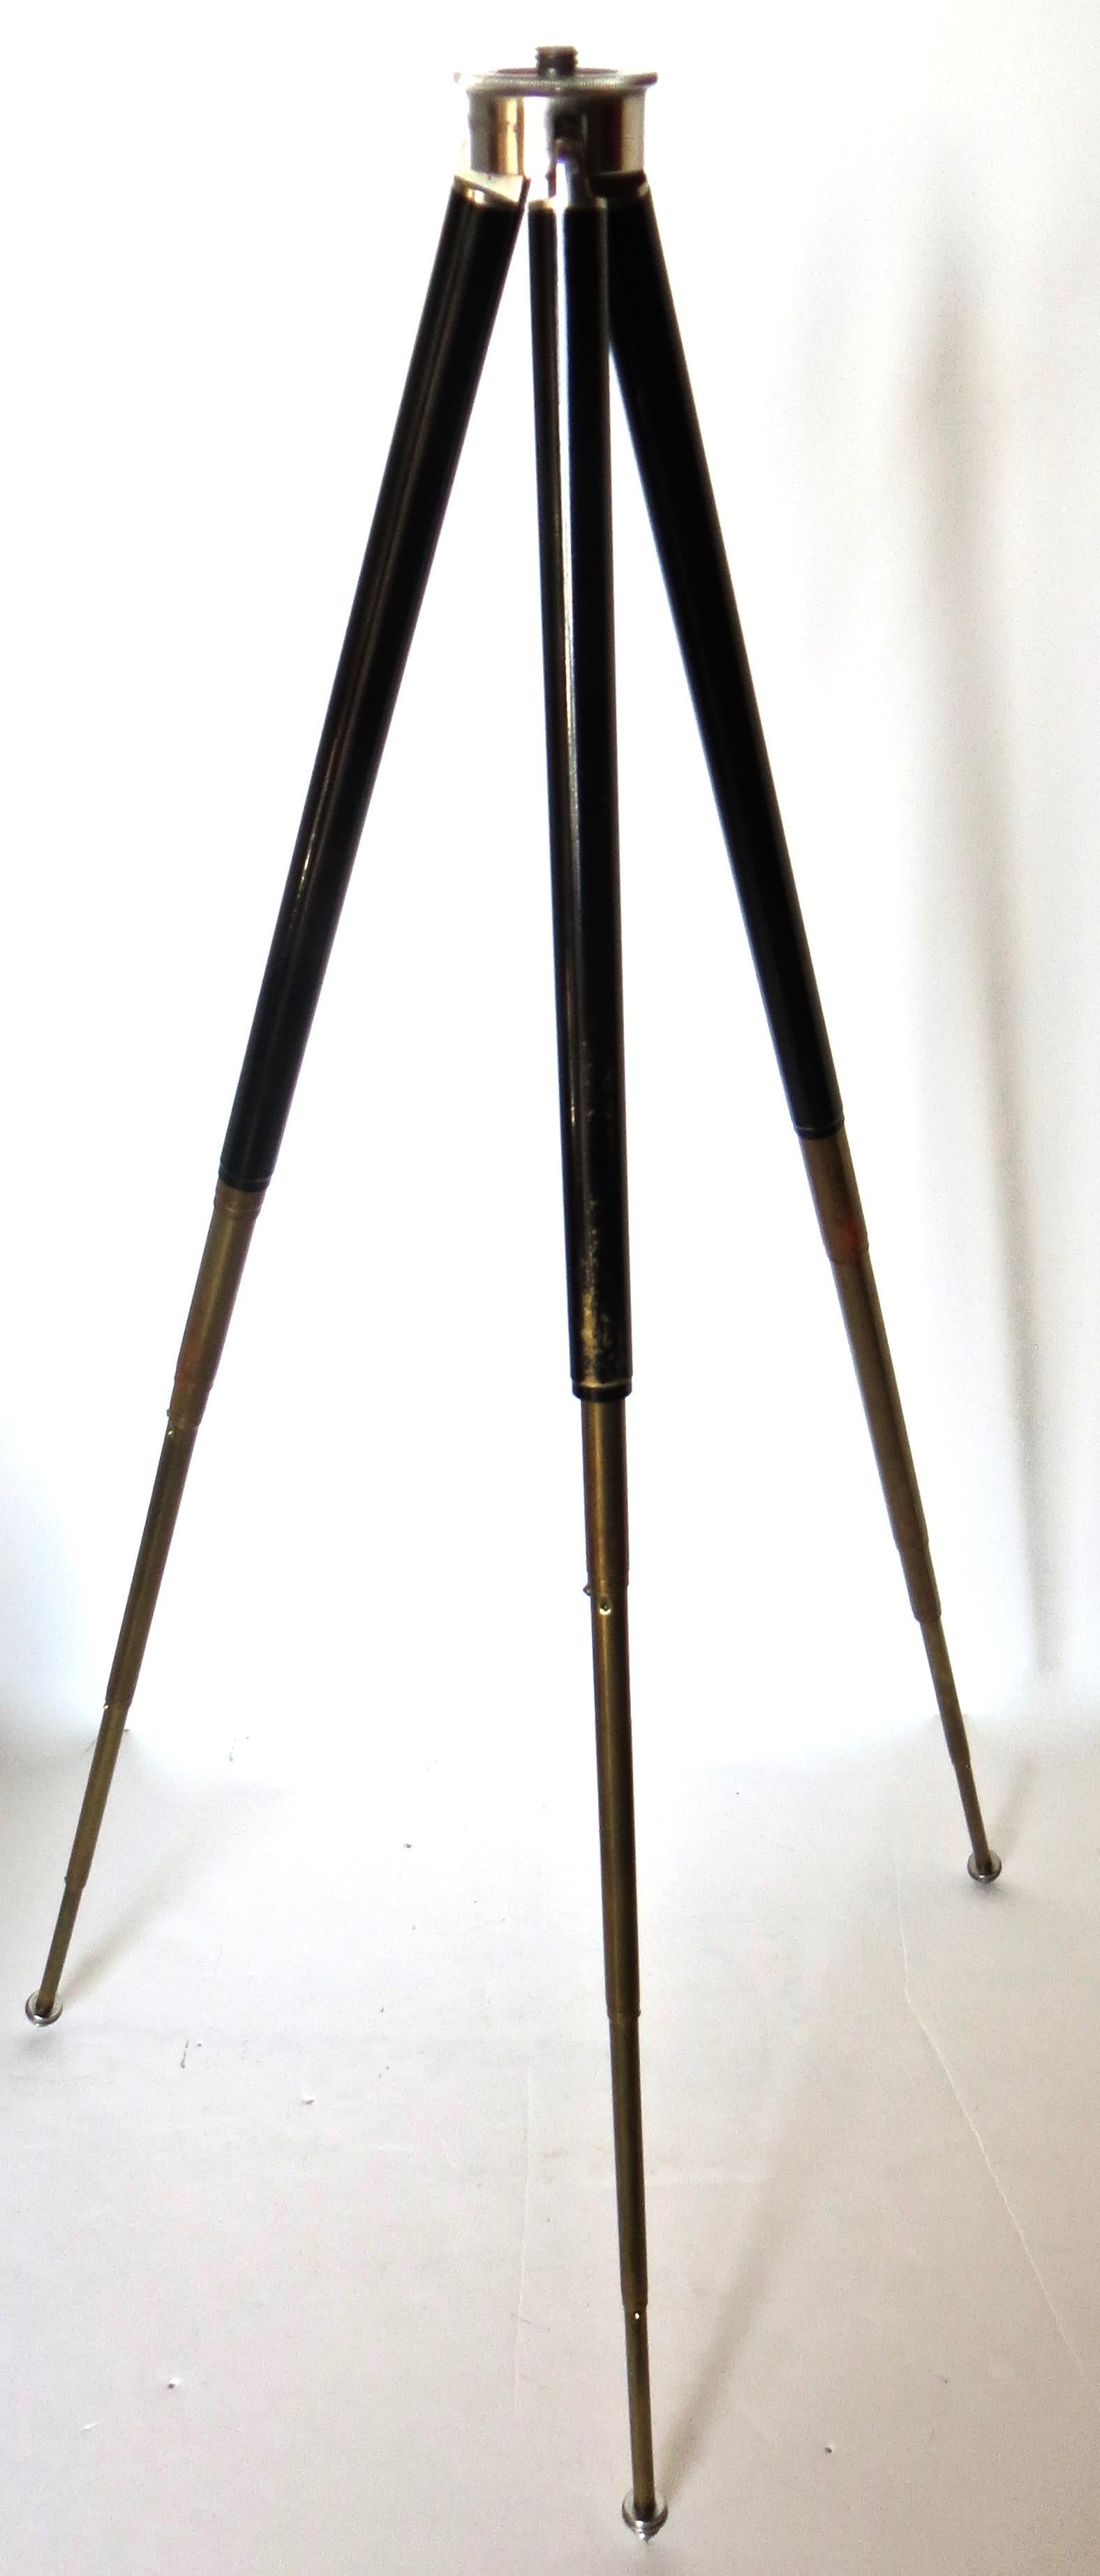 American Vintage Miniature German Variable Camera Tripod 1920s with Ansel Adams Book For Sale